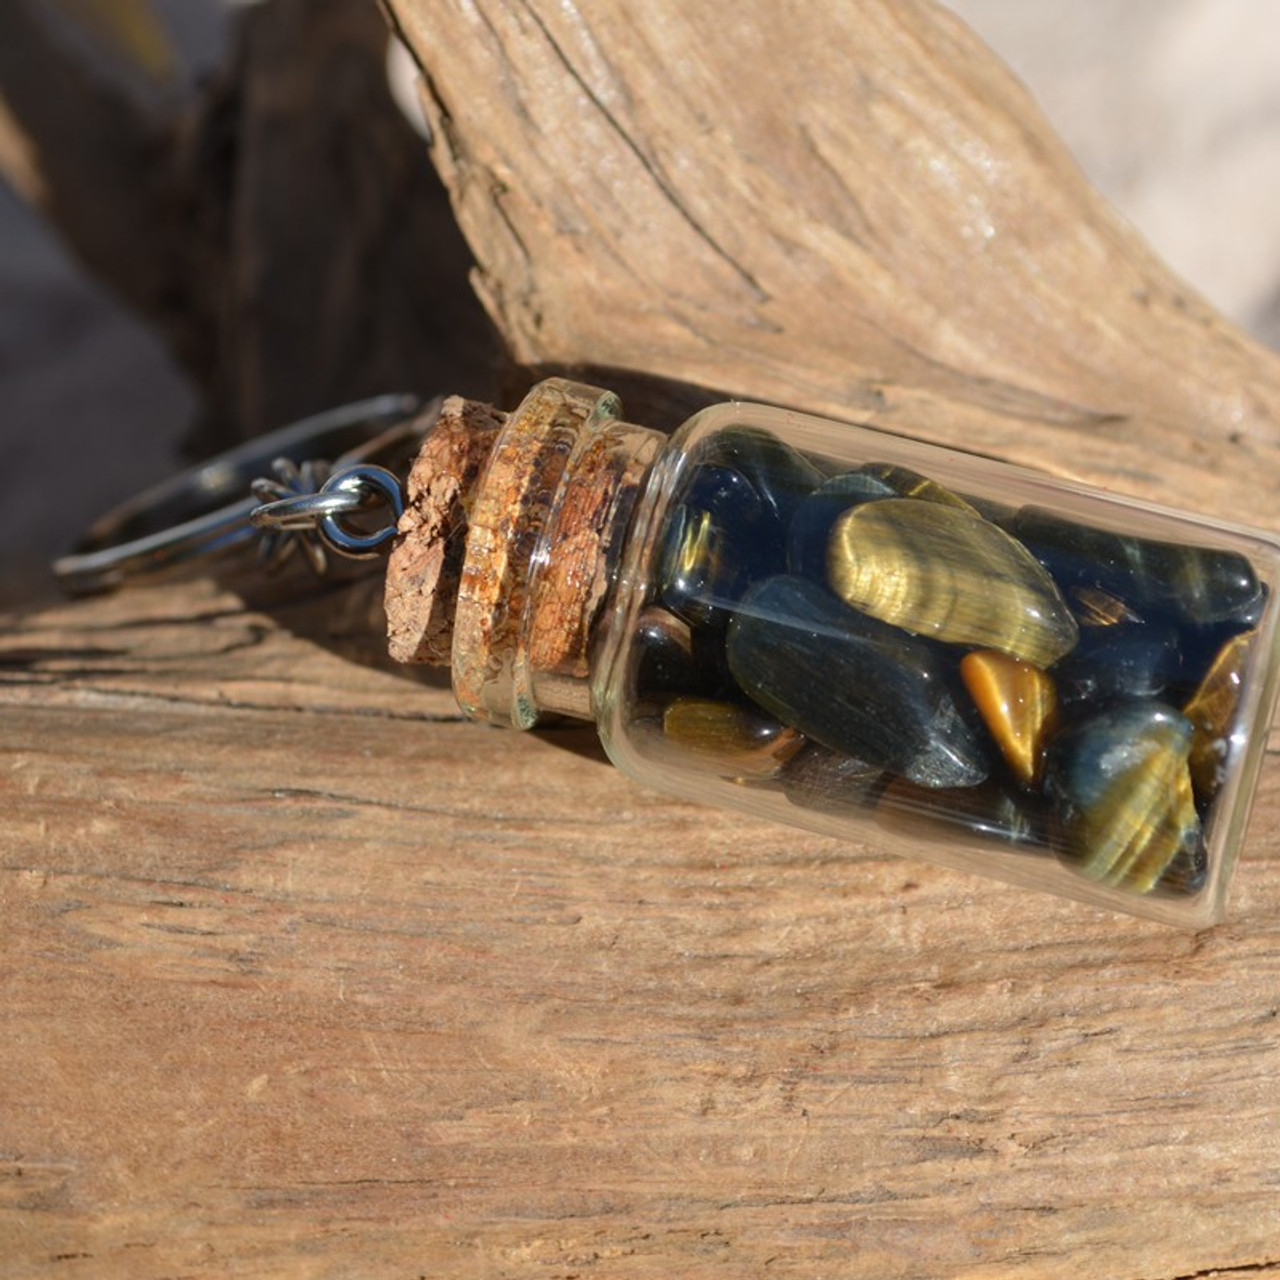 Tiger's Eye Stones in a Glass Vial Keychain